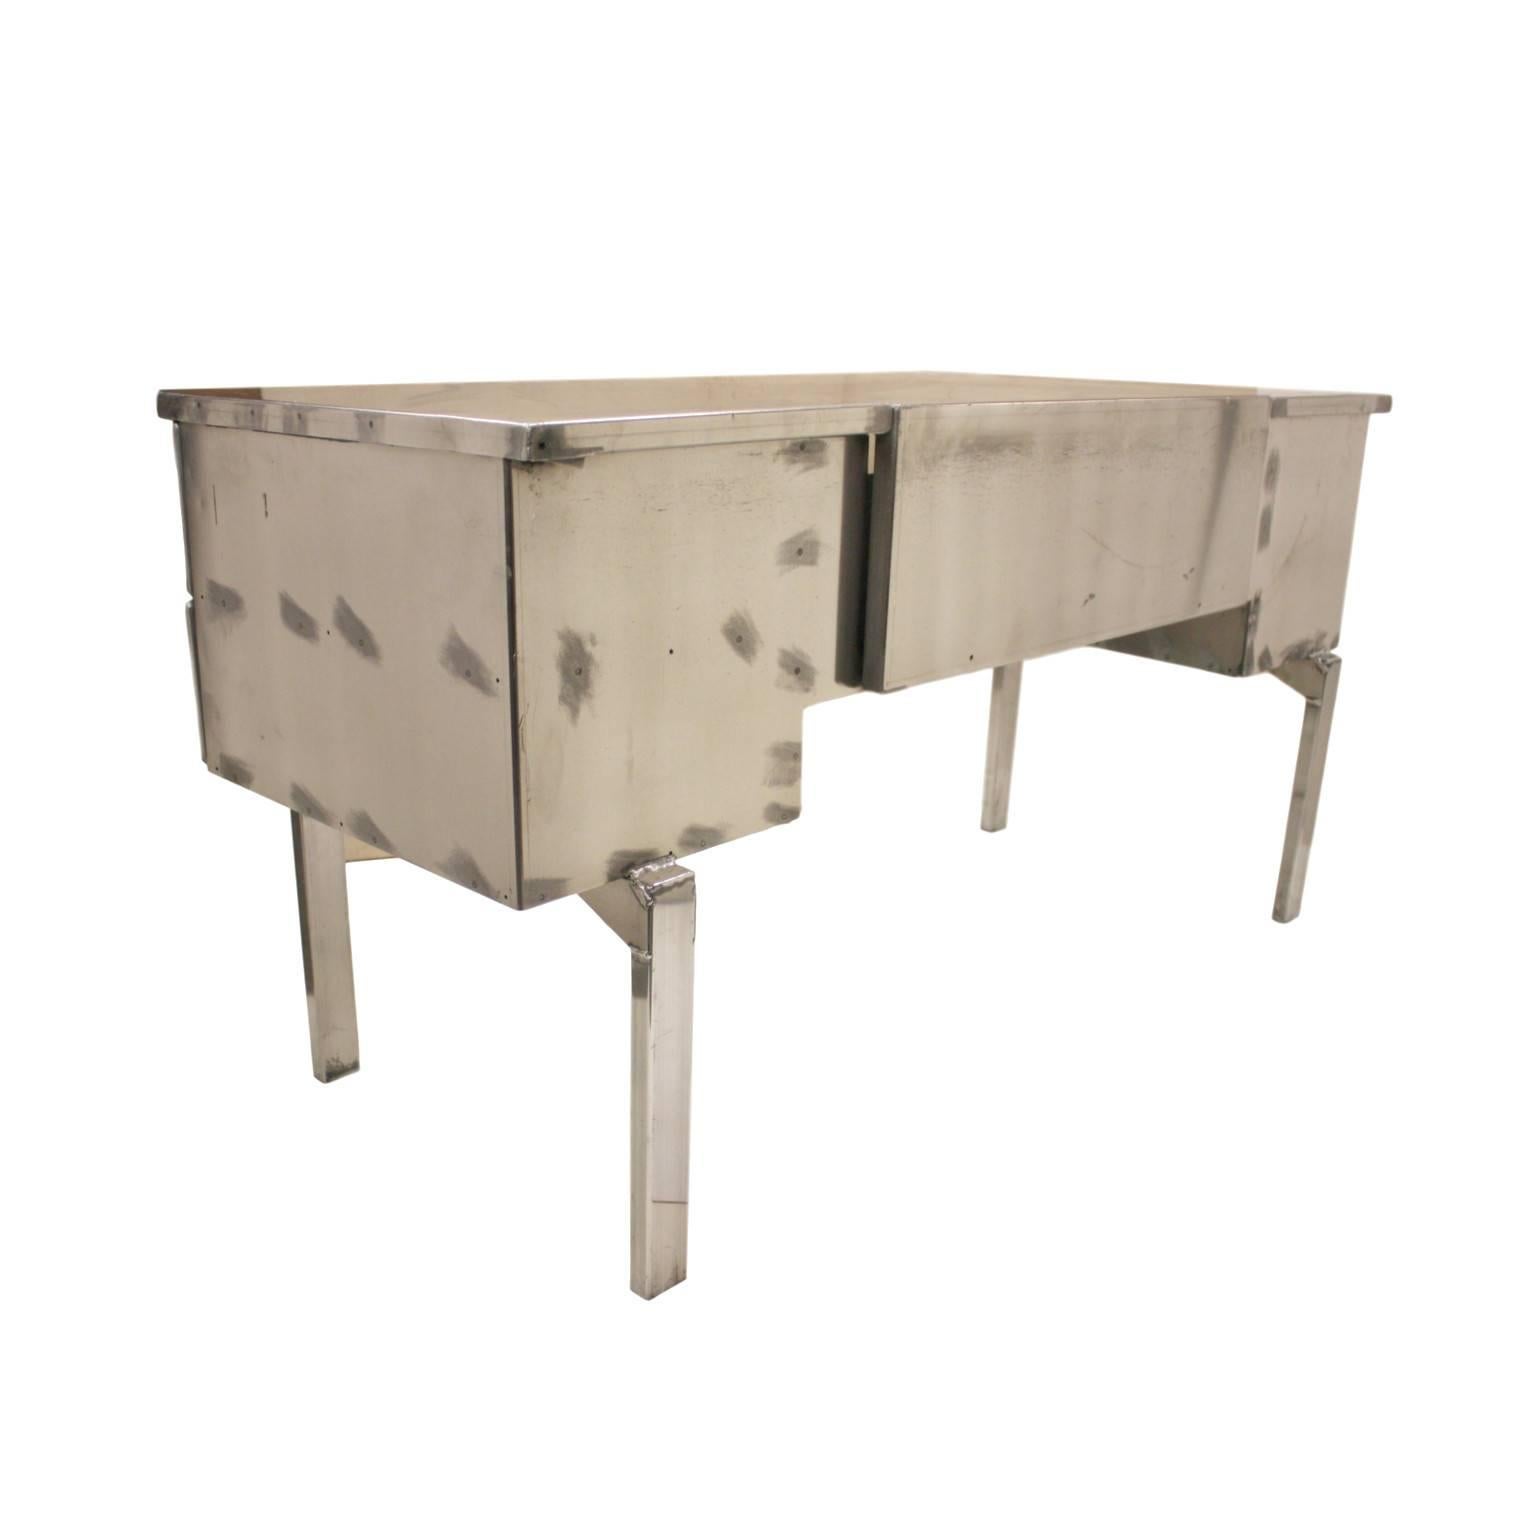 This desk was originally a medical field desk for the US military. Desk is completely constructed from aircraft-grade aluminium and features a very novel folding design that allowed it to be easily transported. We hand-stripped the outside of the